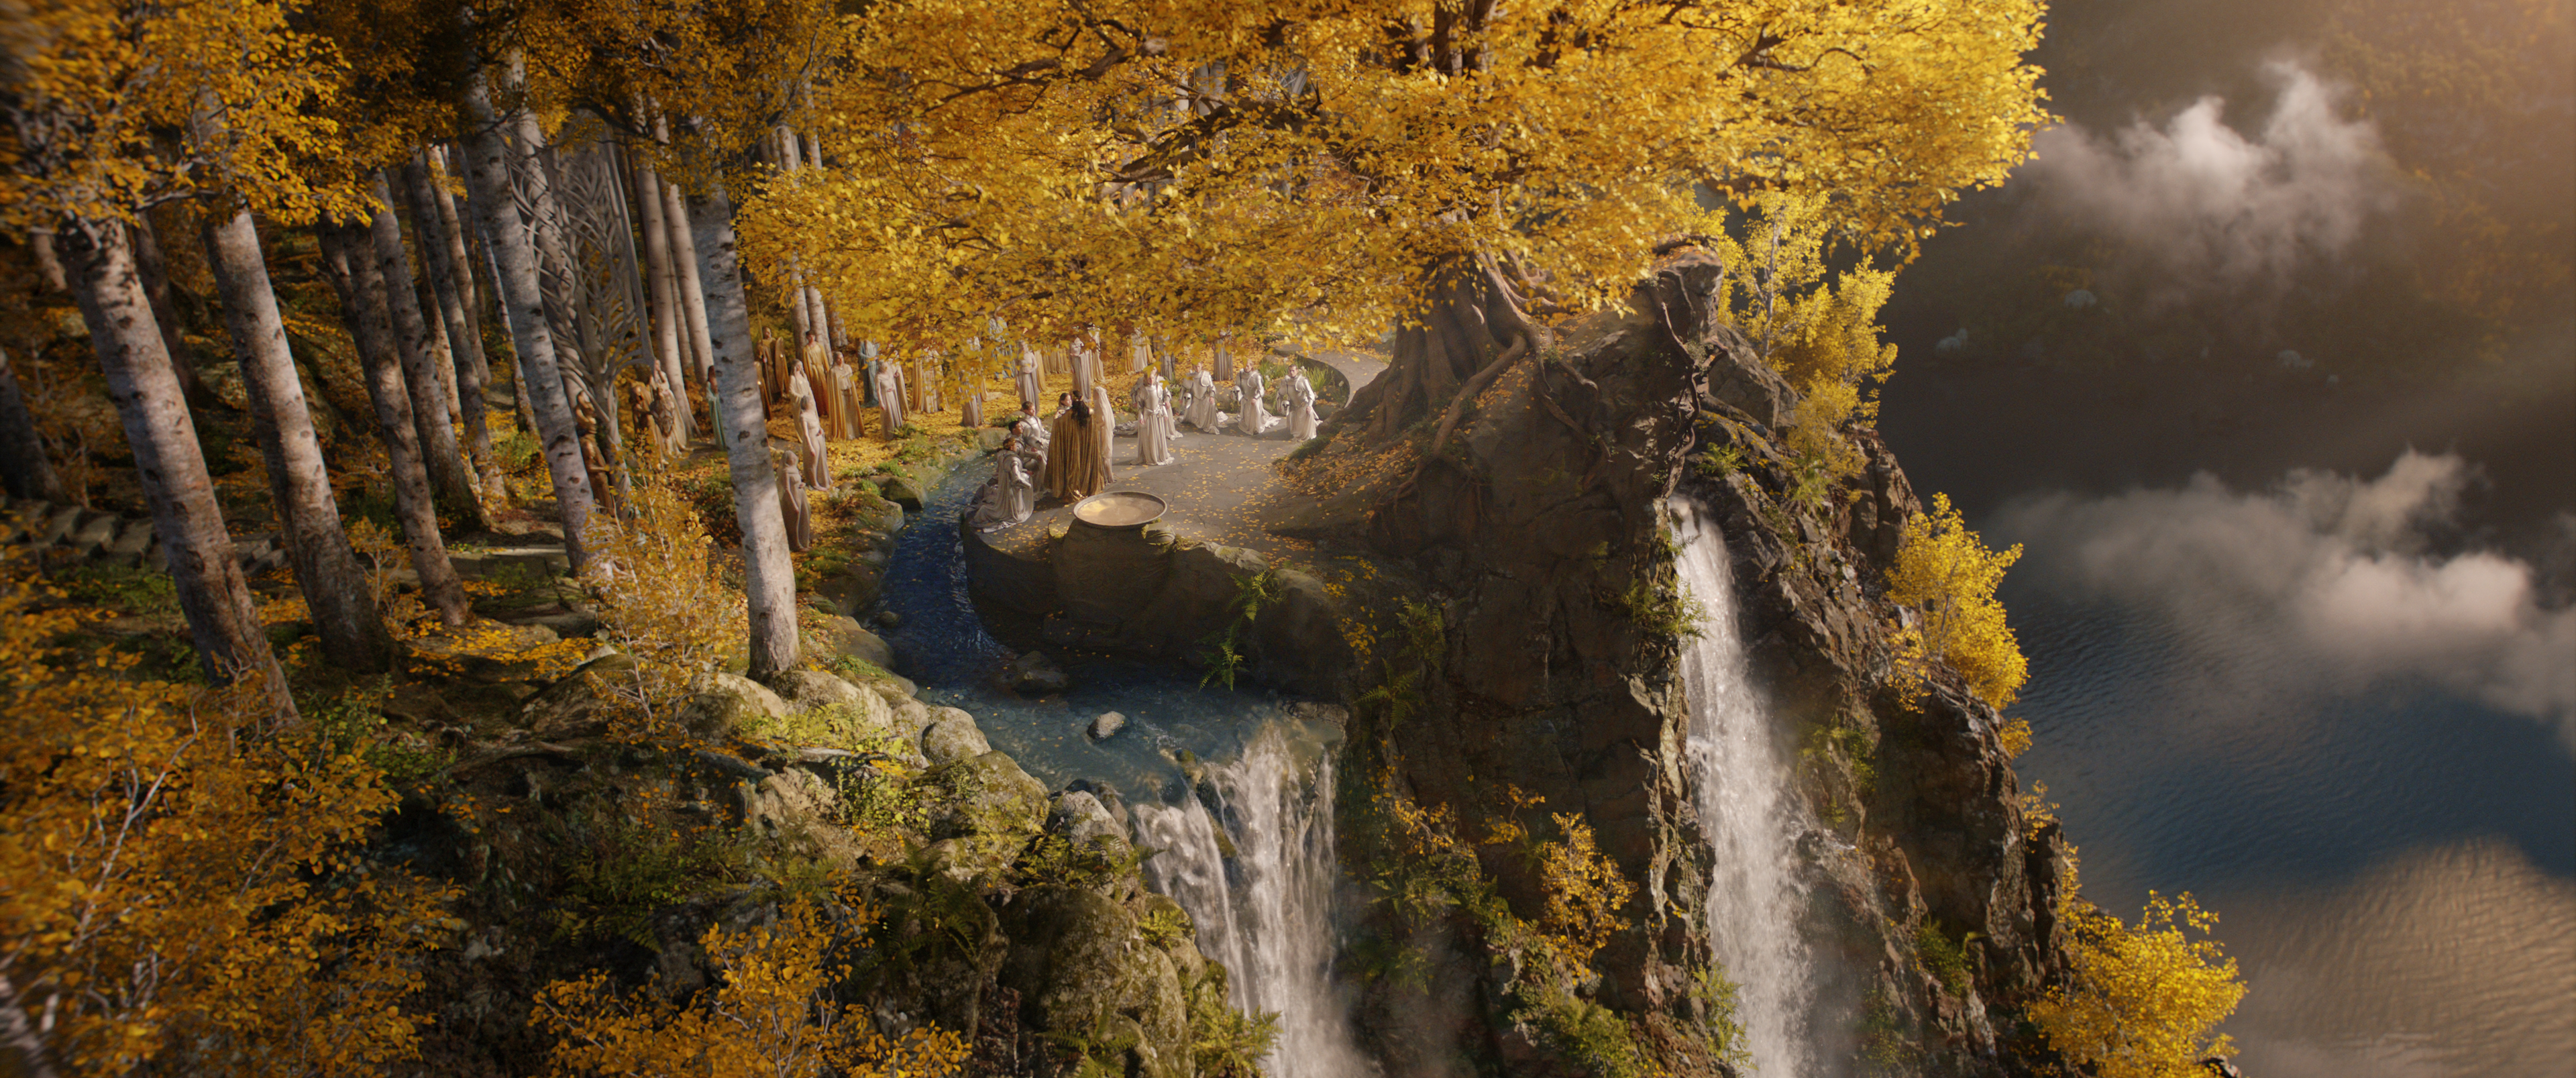 The Lord Of The Rings Rings Of Power TV Series Ultrawide Film Stills Trees Water Waterfall Clouds Fo 3840x1607